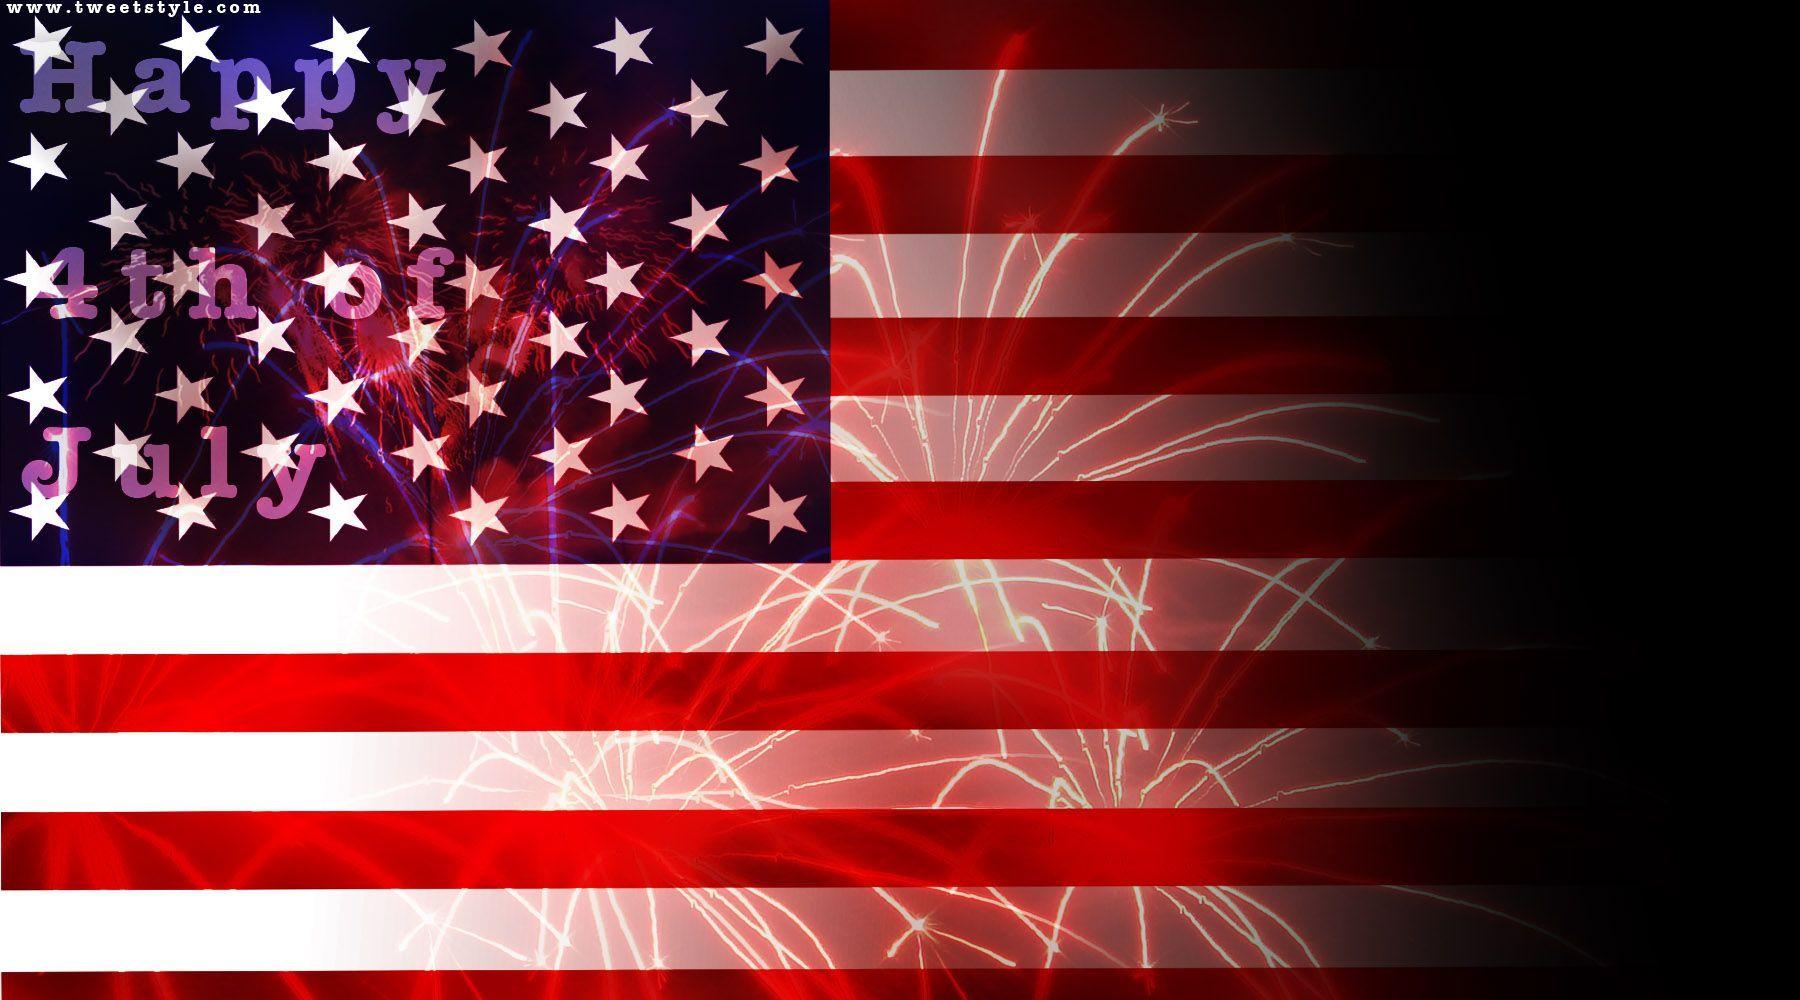 The Image of July 4th 1800x1000 free background 4th of july